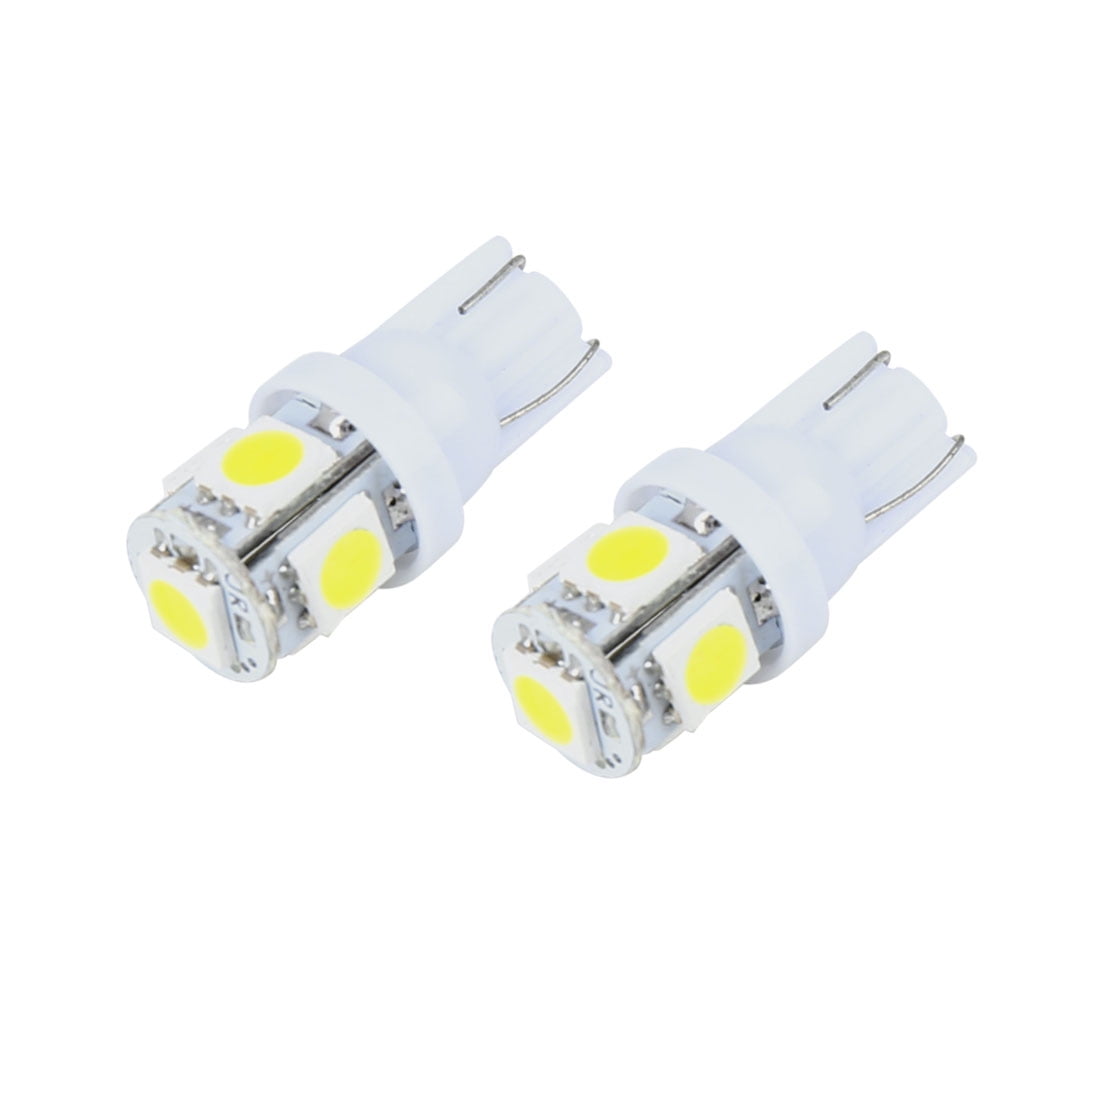 Details about   Canbus Error LED Light 194 White 6000K Two Bulbs License Plate Tag Replace SMD 